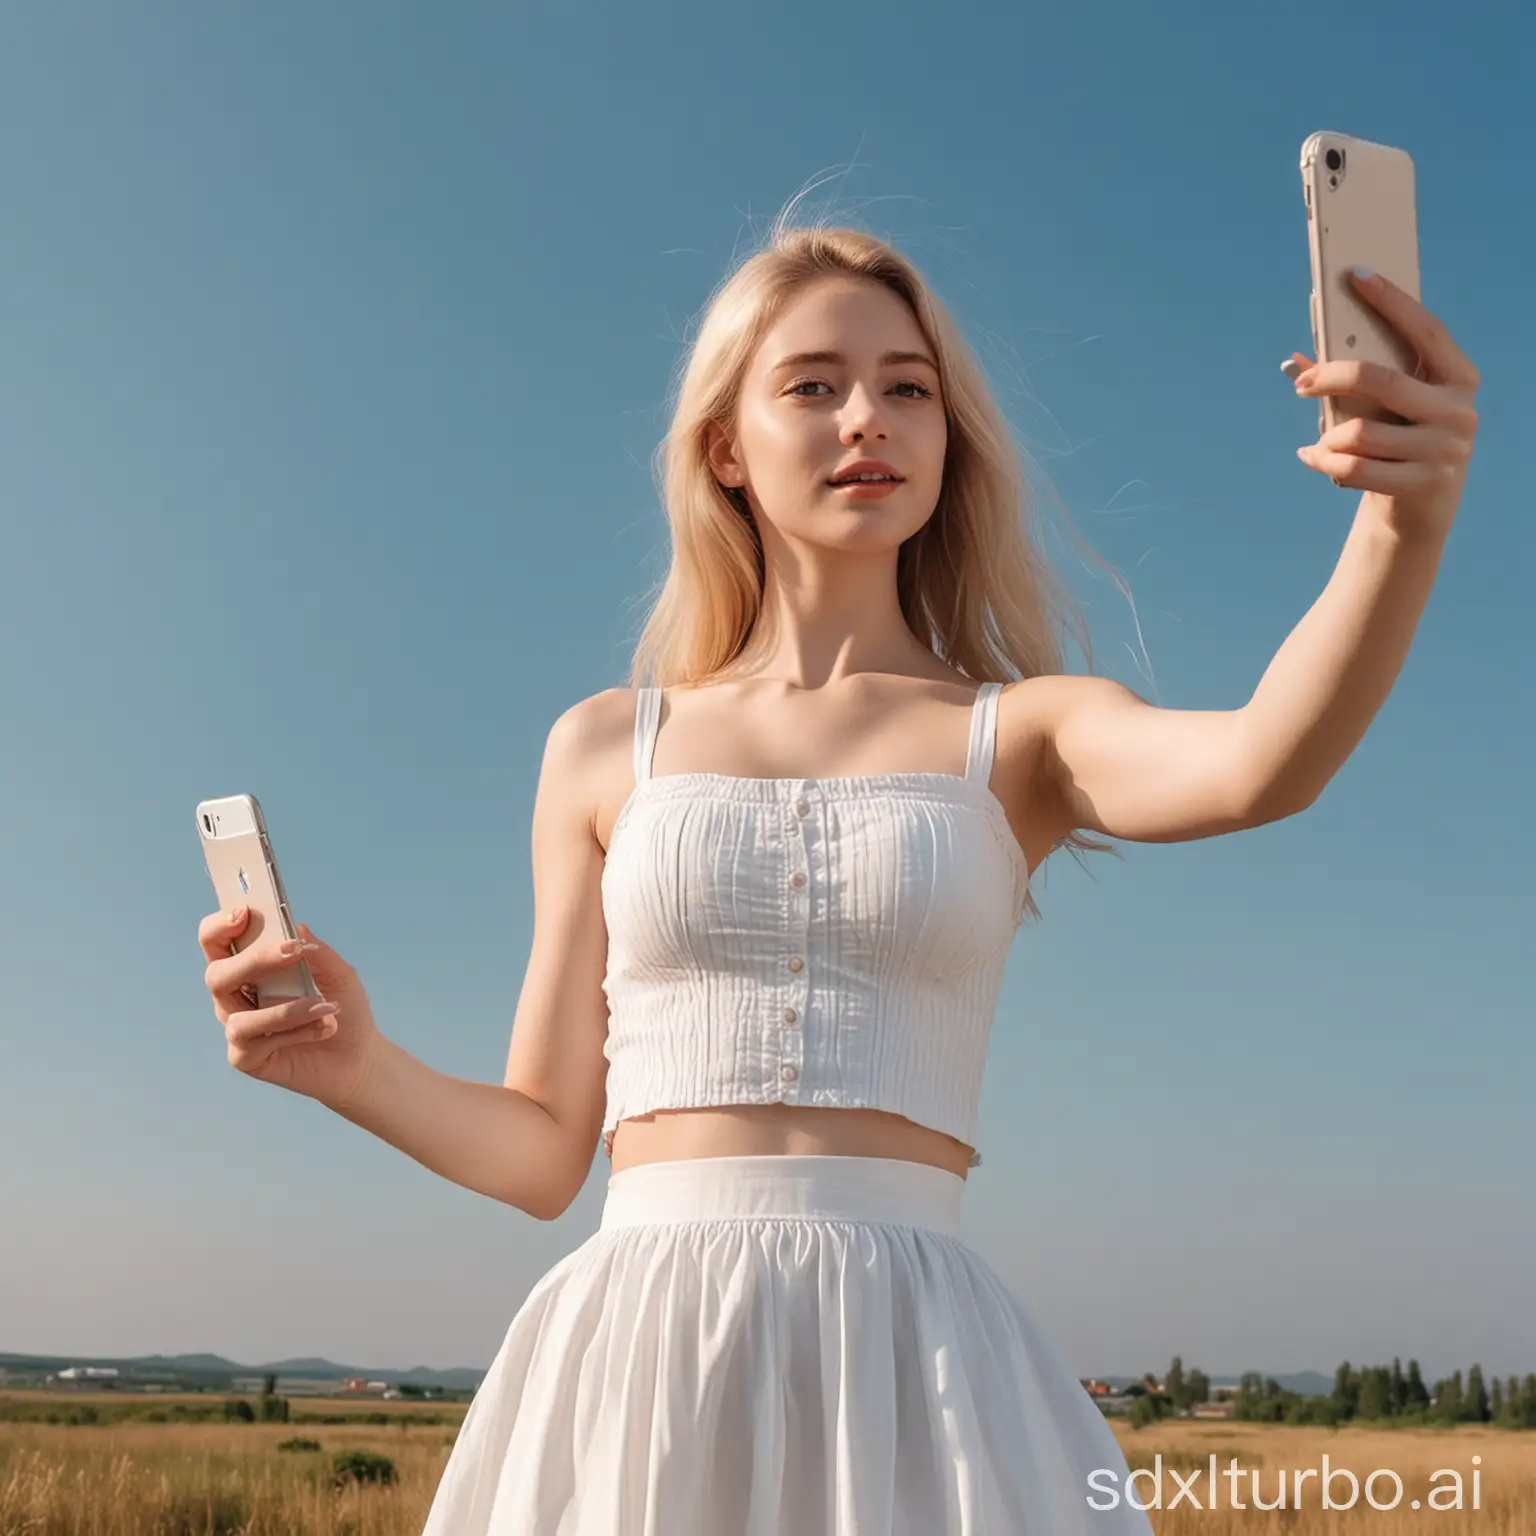 Wearing a white long skirt, a fair-skinned girl is taking selfies with a mobile phone under the blue sky